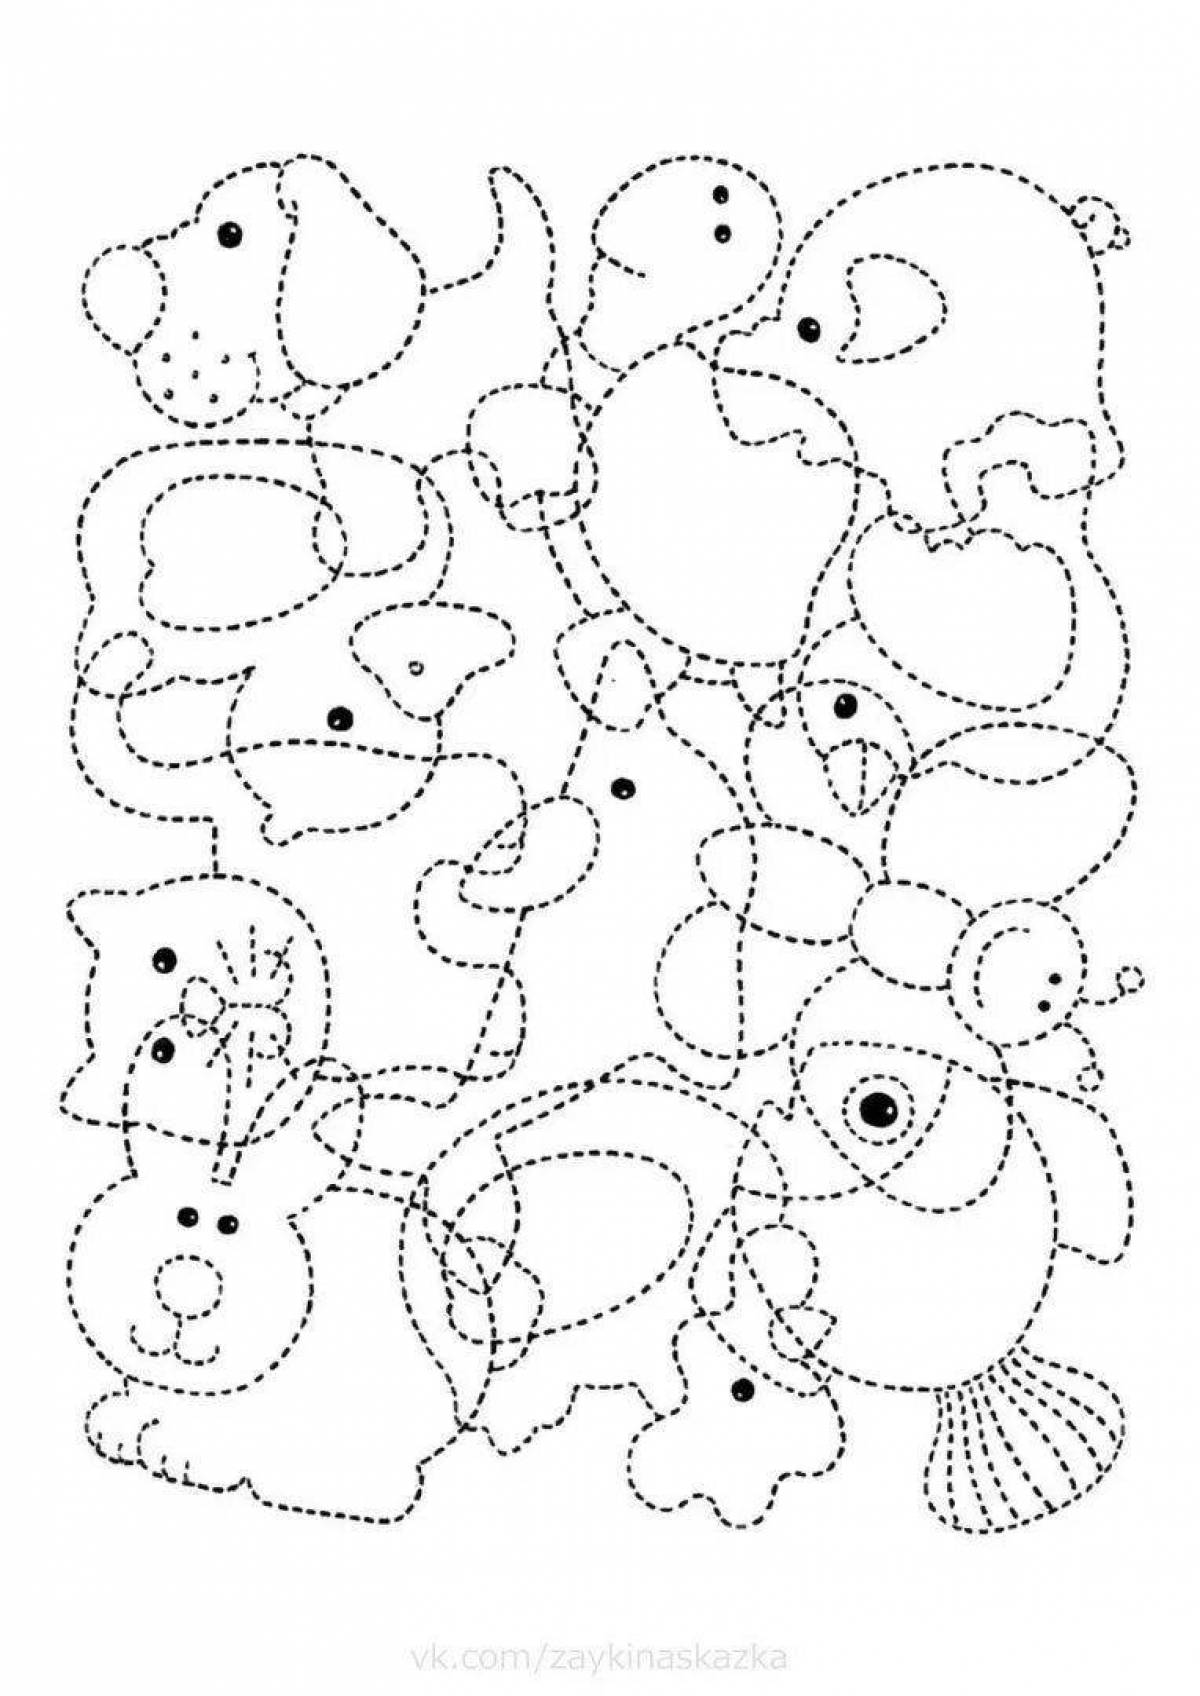 A fascinating coloring book for the development of fine motor skills in children 6-7 years old